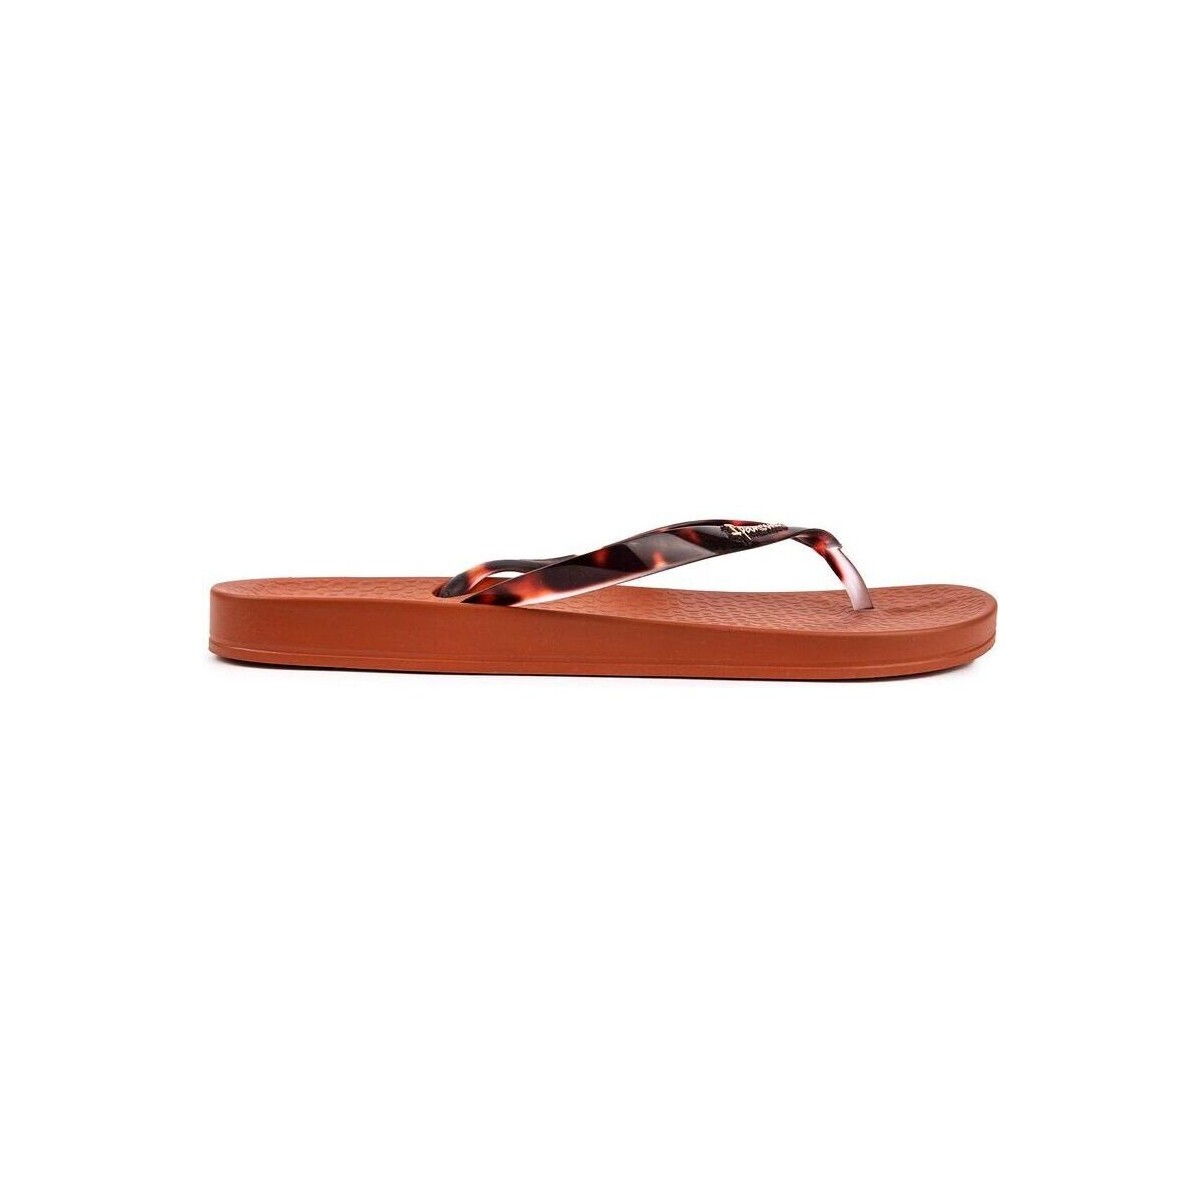 Chaussures Femme Tongs Ipanema Connect Tortoise Shell Tongs Marron